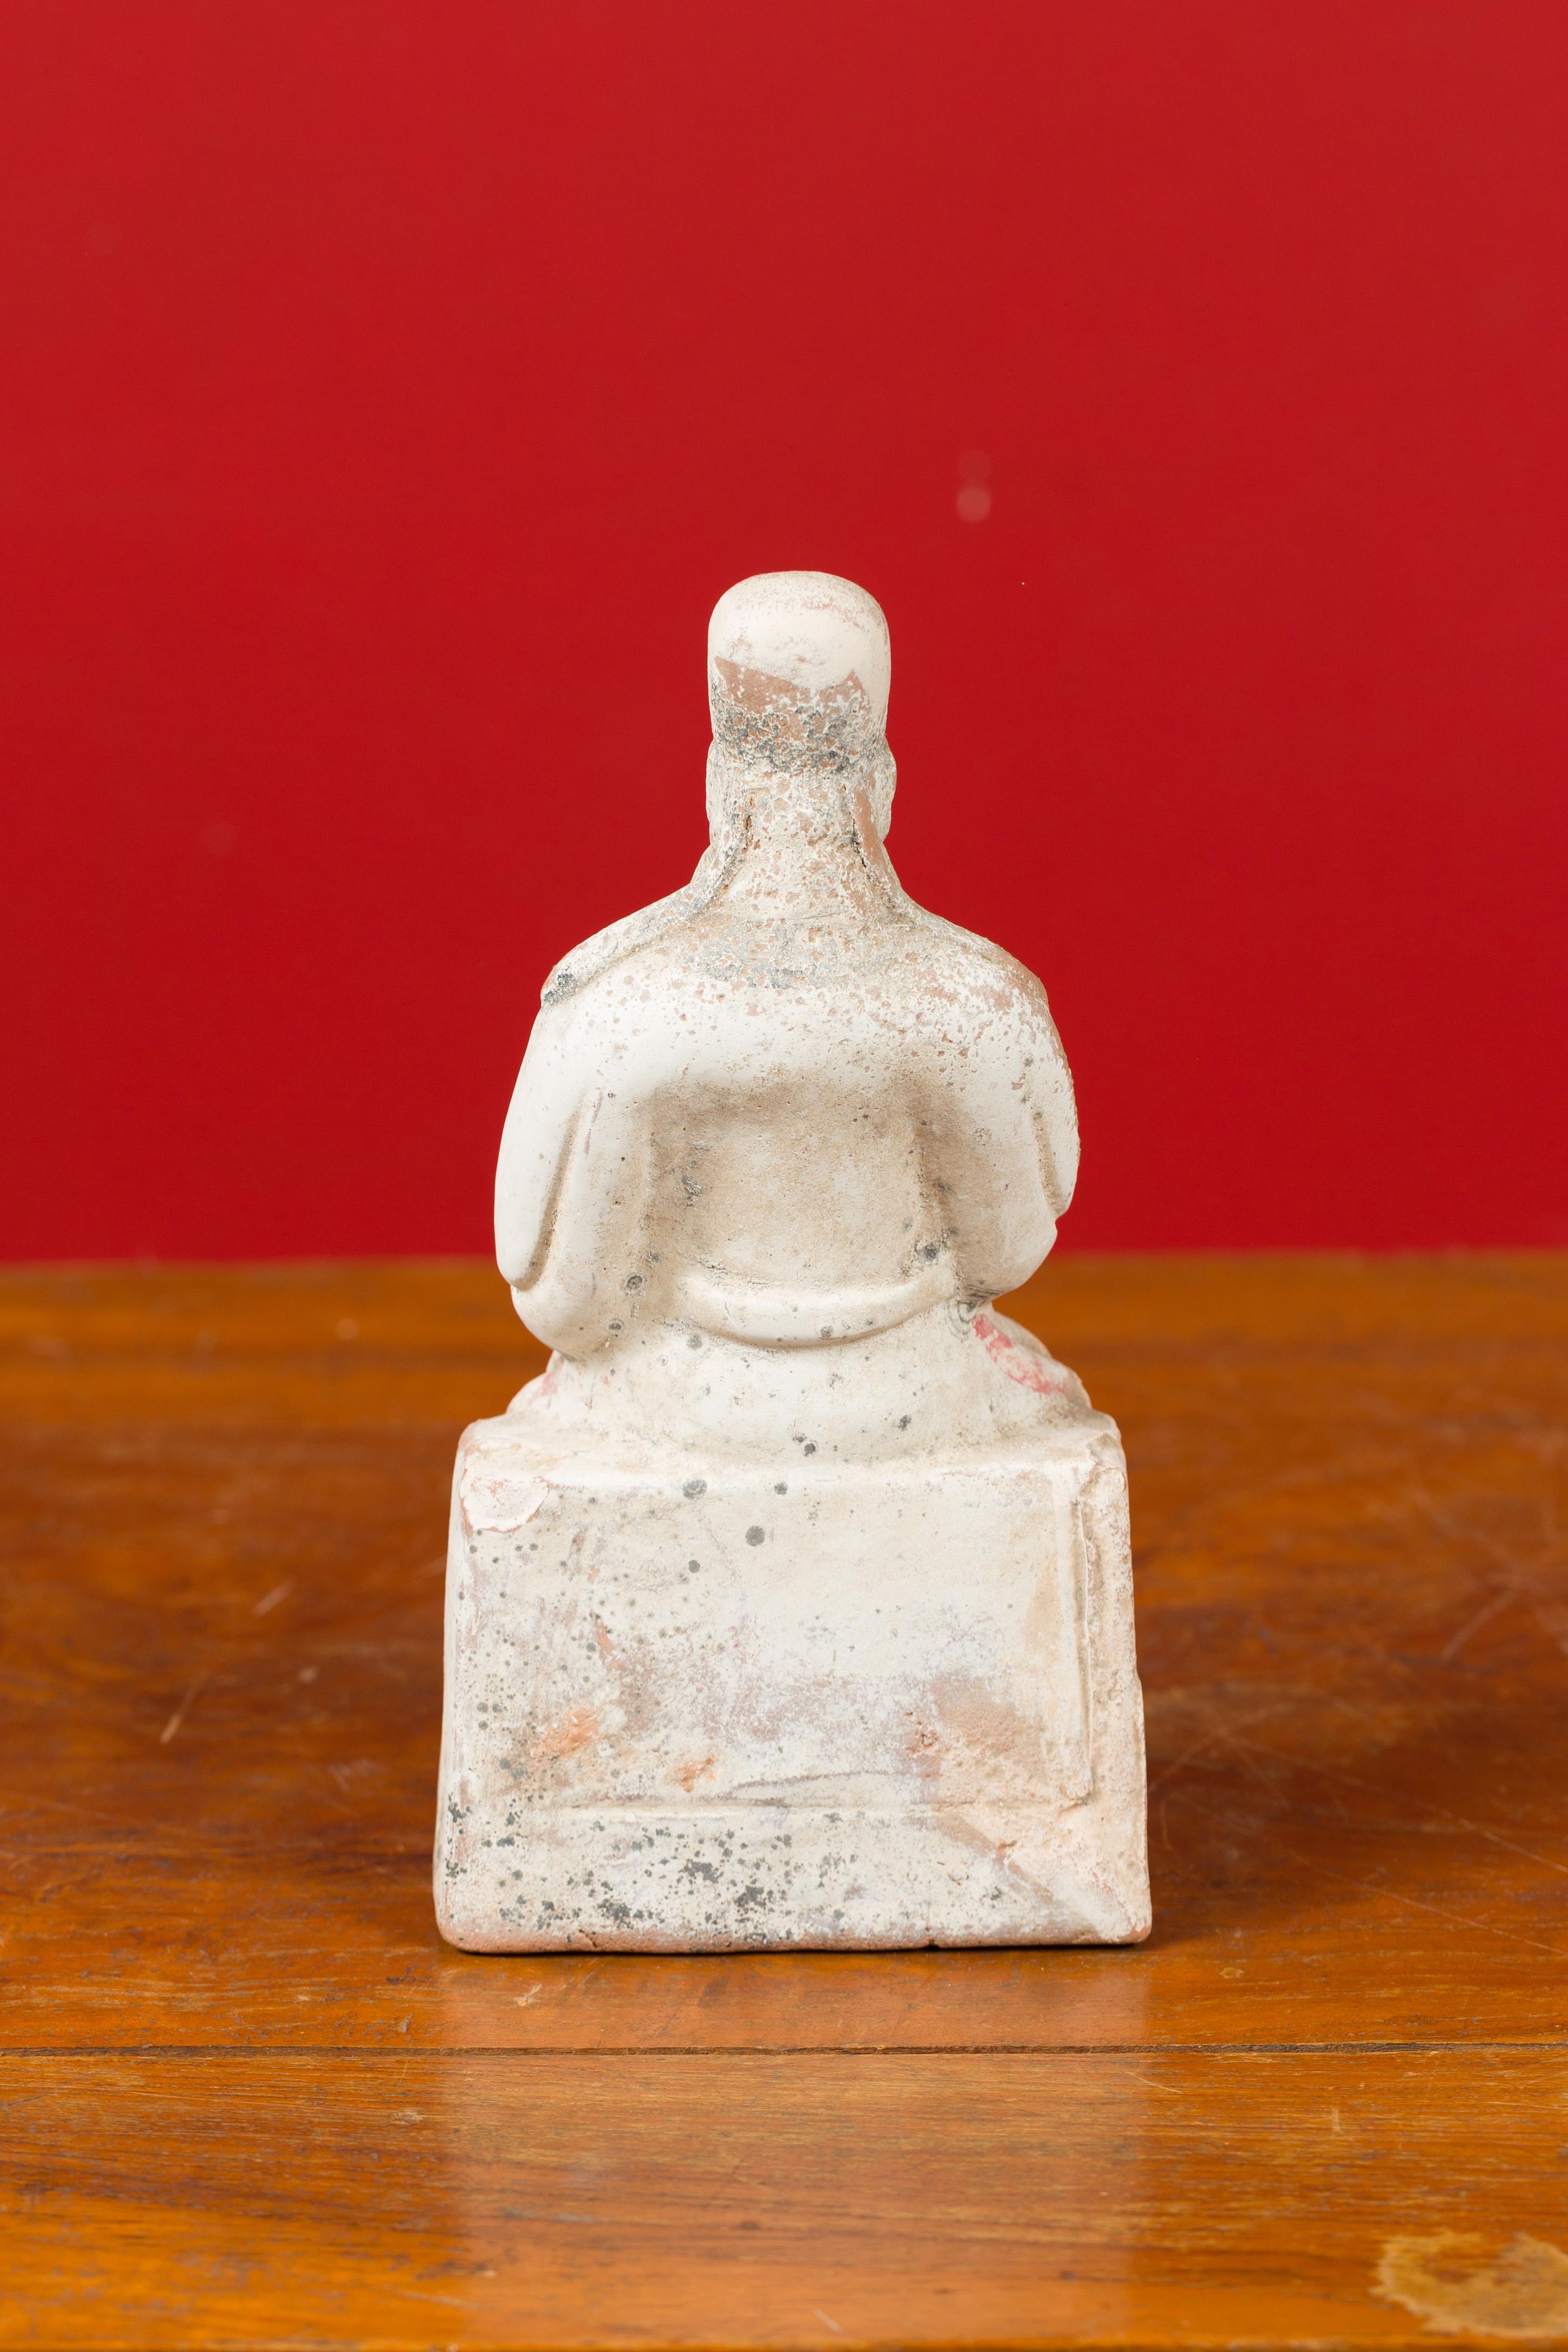 Chinese Han Dynasty Period Terracotta Dignitary Figure with White and Red Paint 5